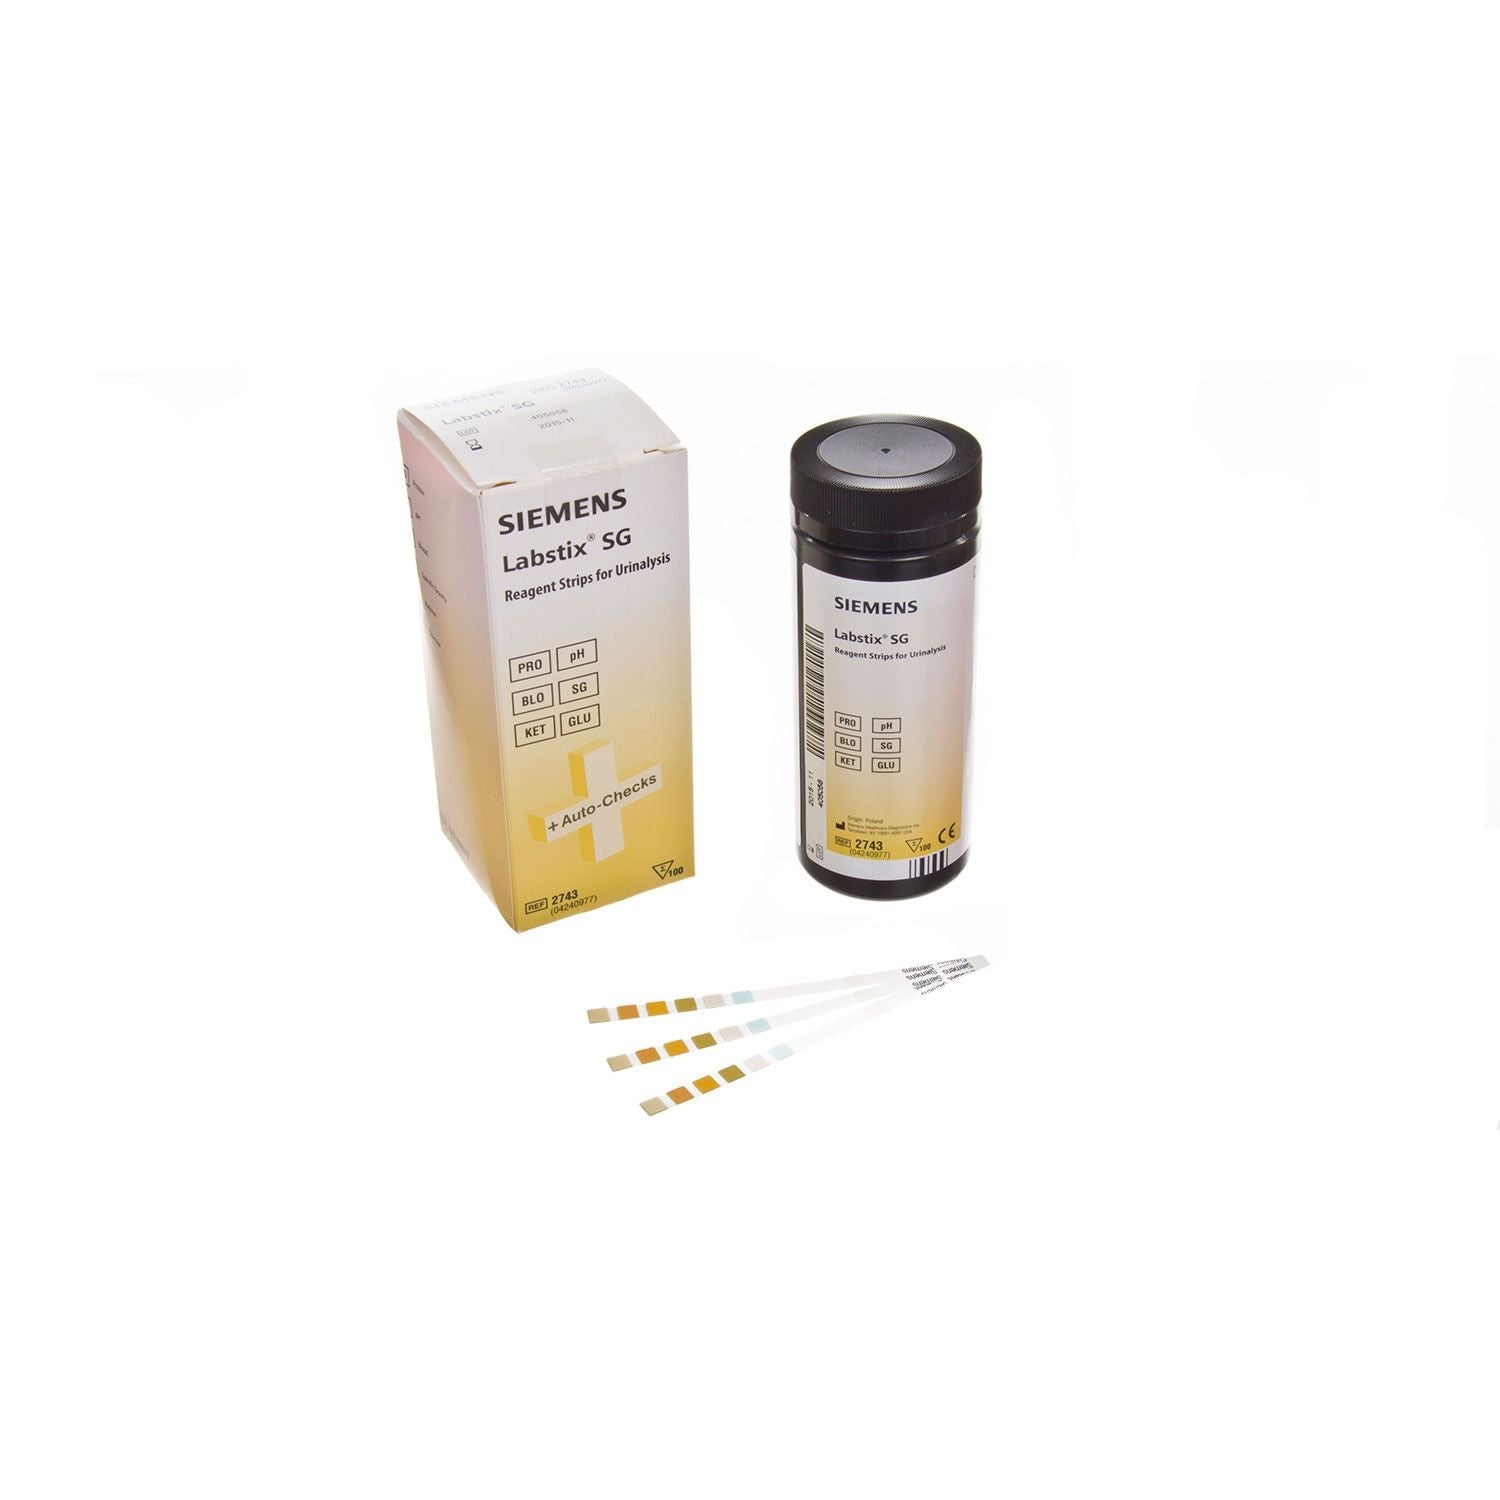 Siemens Labstix Reagent Strips for Urinalysis | Pack of 100 (1)